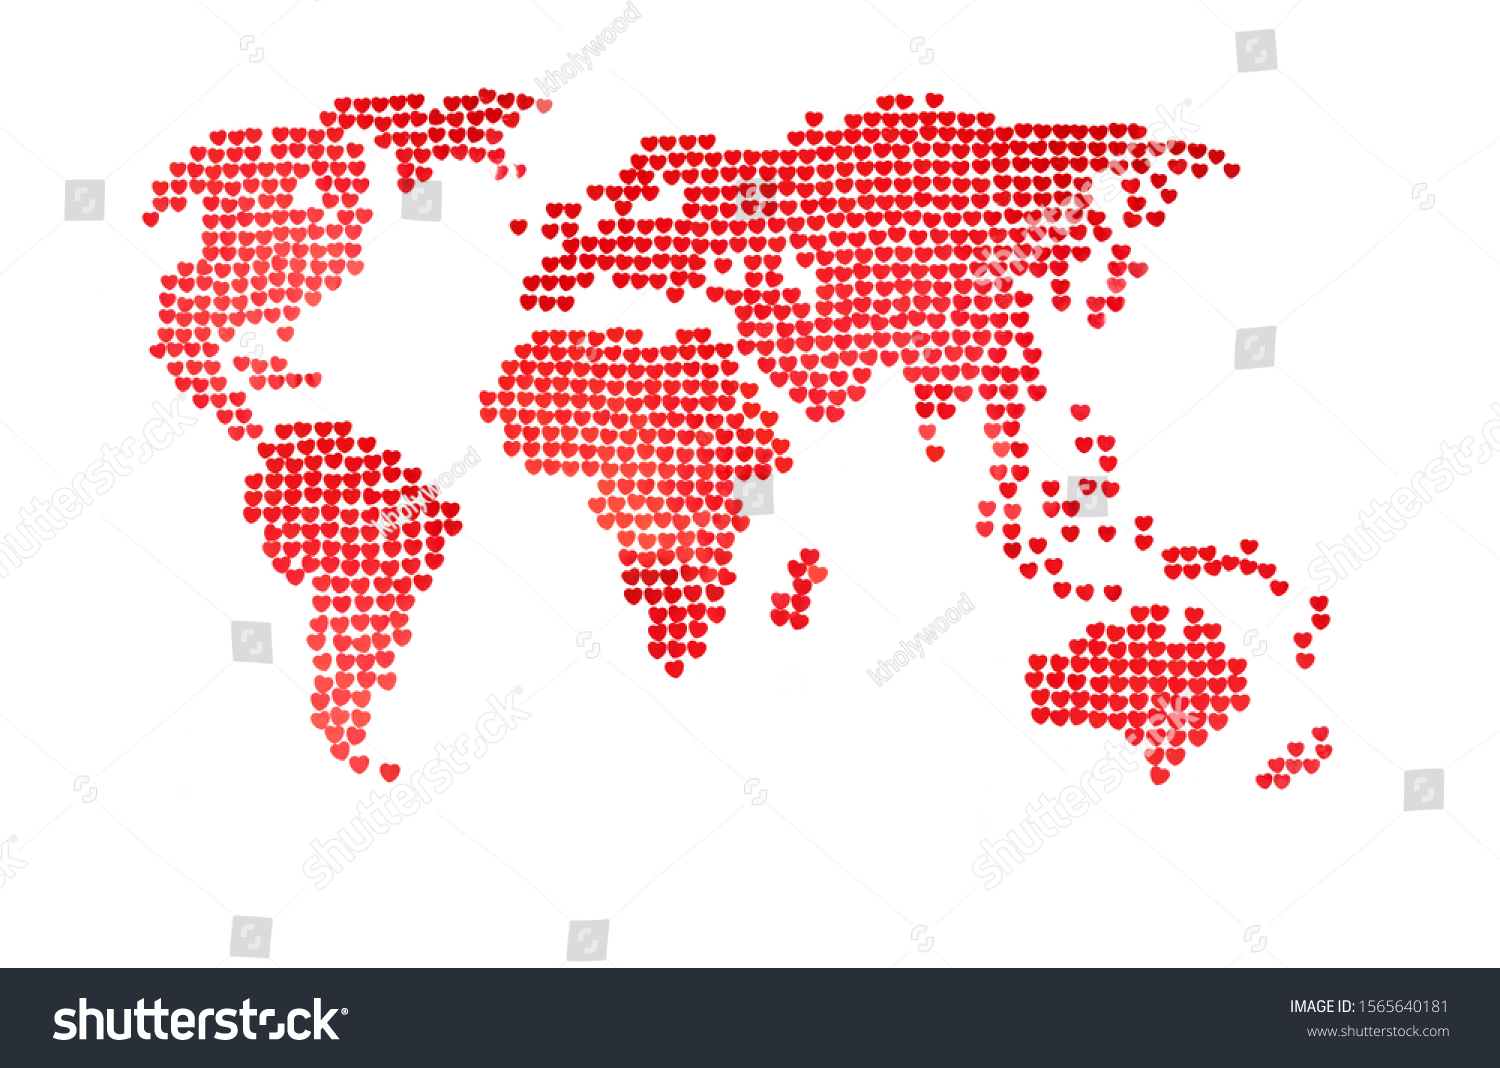 Sketchy world map of red confetti in the shape of hearts. The concept of global holidays, valentines day, weddings, parties. White background, minimalism. An approximate scheme.  #1565640181